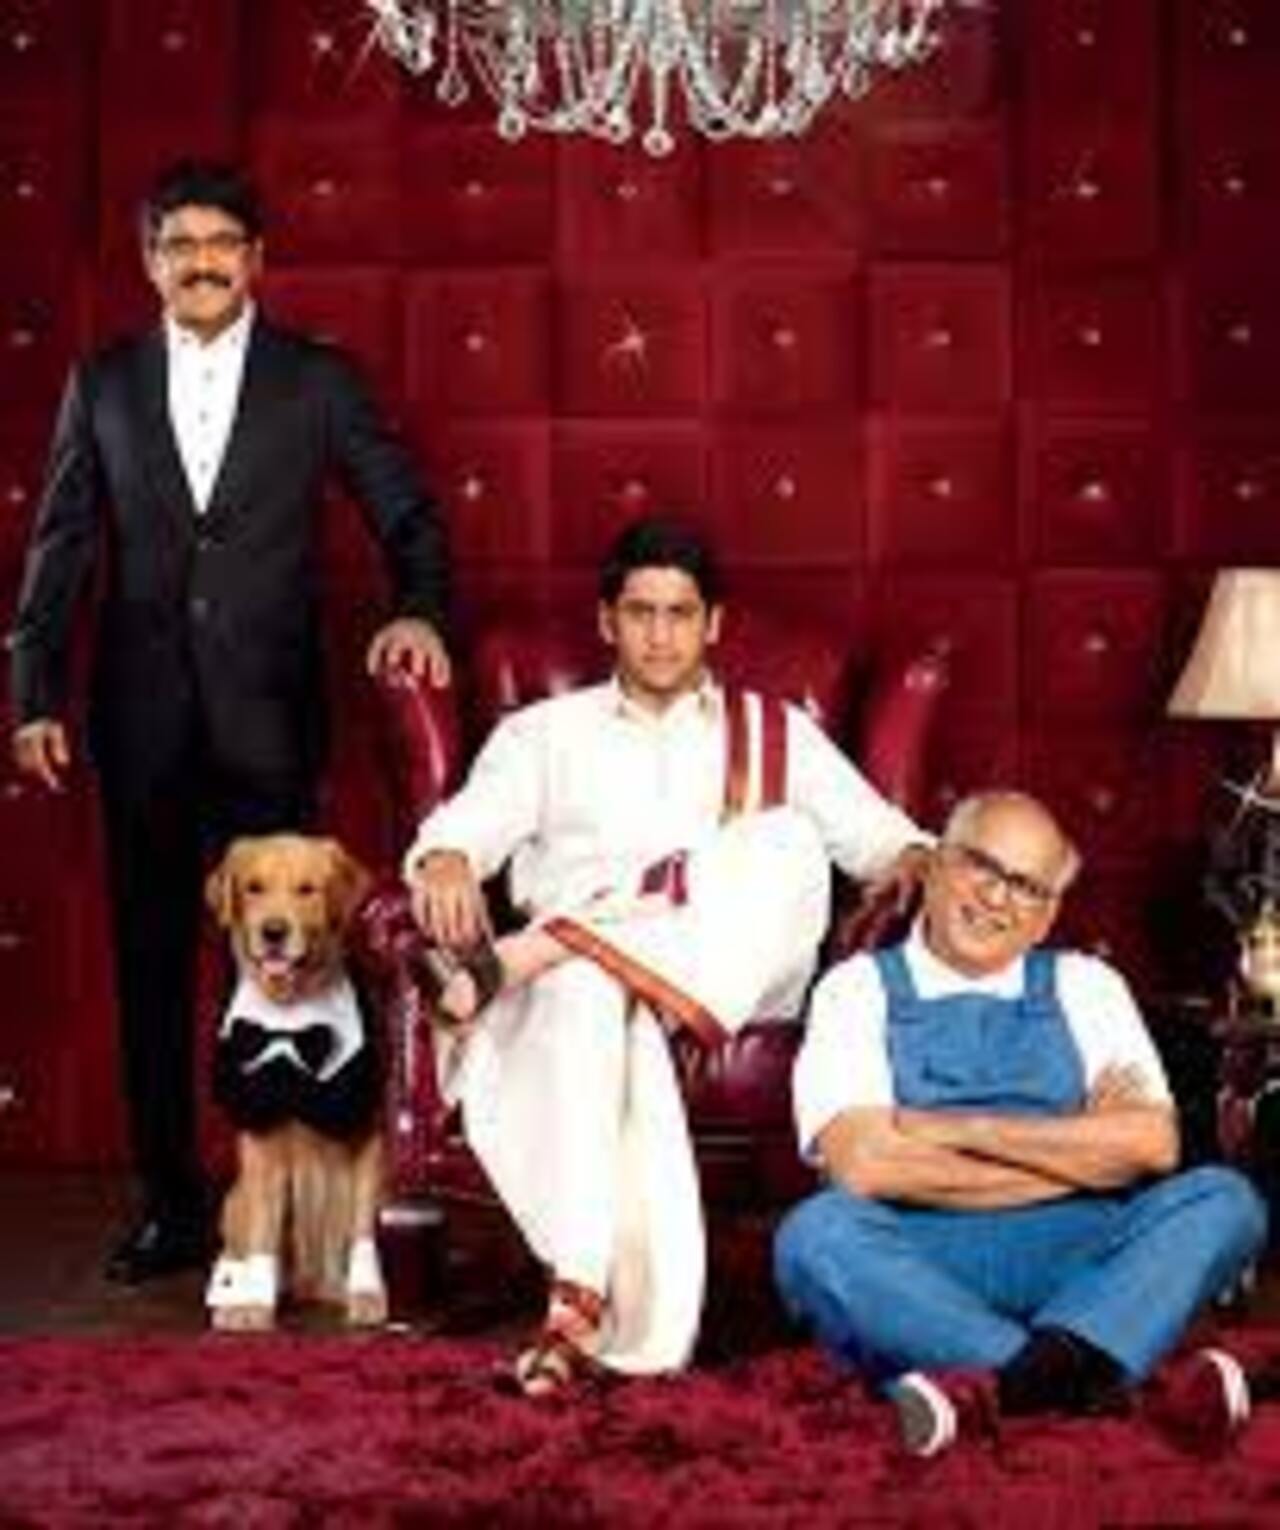 Manam 
This Telugu film revolves around Bittu, a six-year-old, who loses his parents in an unfortunate car accident. Thirty years later, he comes across two collegians who look exactly like his late parents' young selves